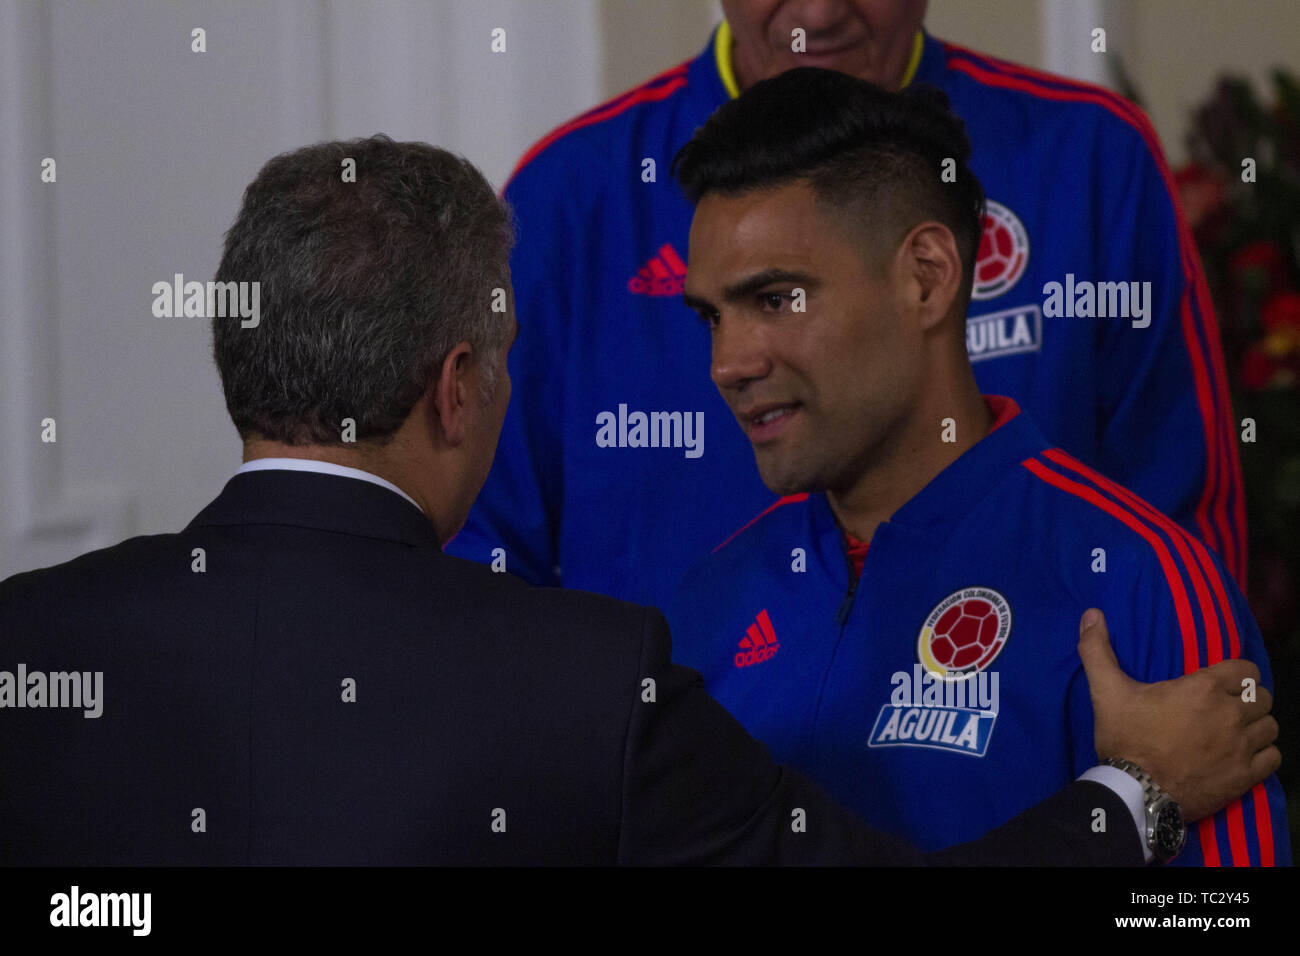 June 4, 2019 - President Ivan Duque speaks with the captain of the Colombian team, Radamel Falcao at the ceremony at the Casa de NariÃ±o. Credit: Daniel Garzon Herazo/ZUMA Wire/Alamy Live News Stock Photo